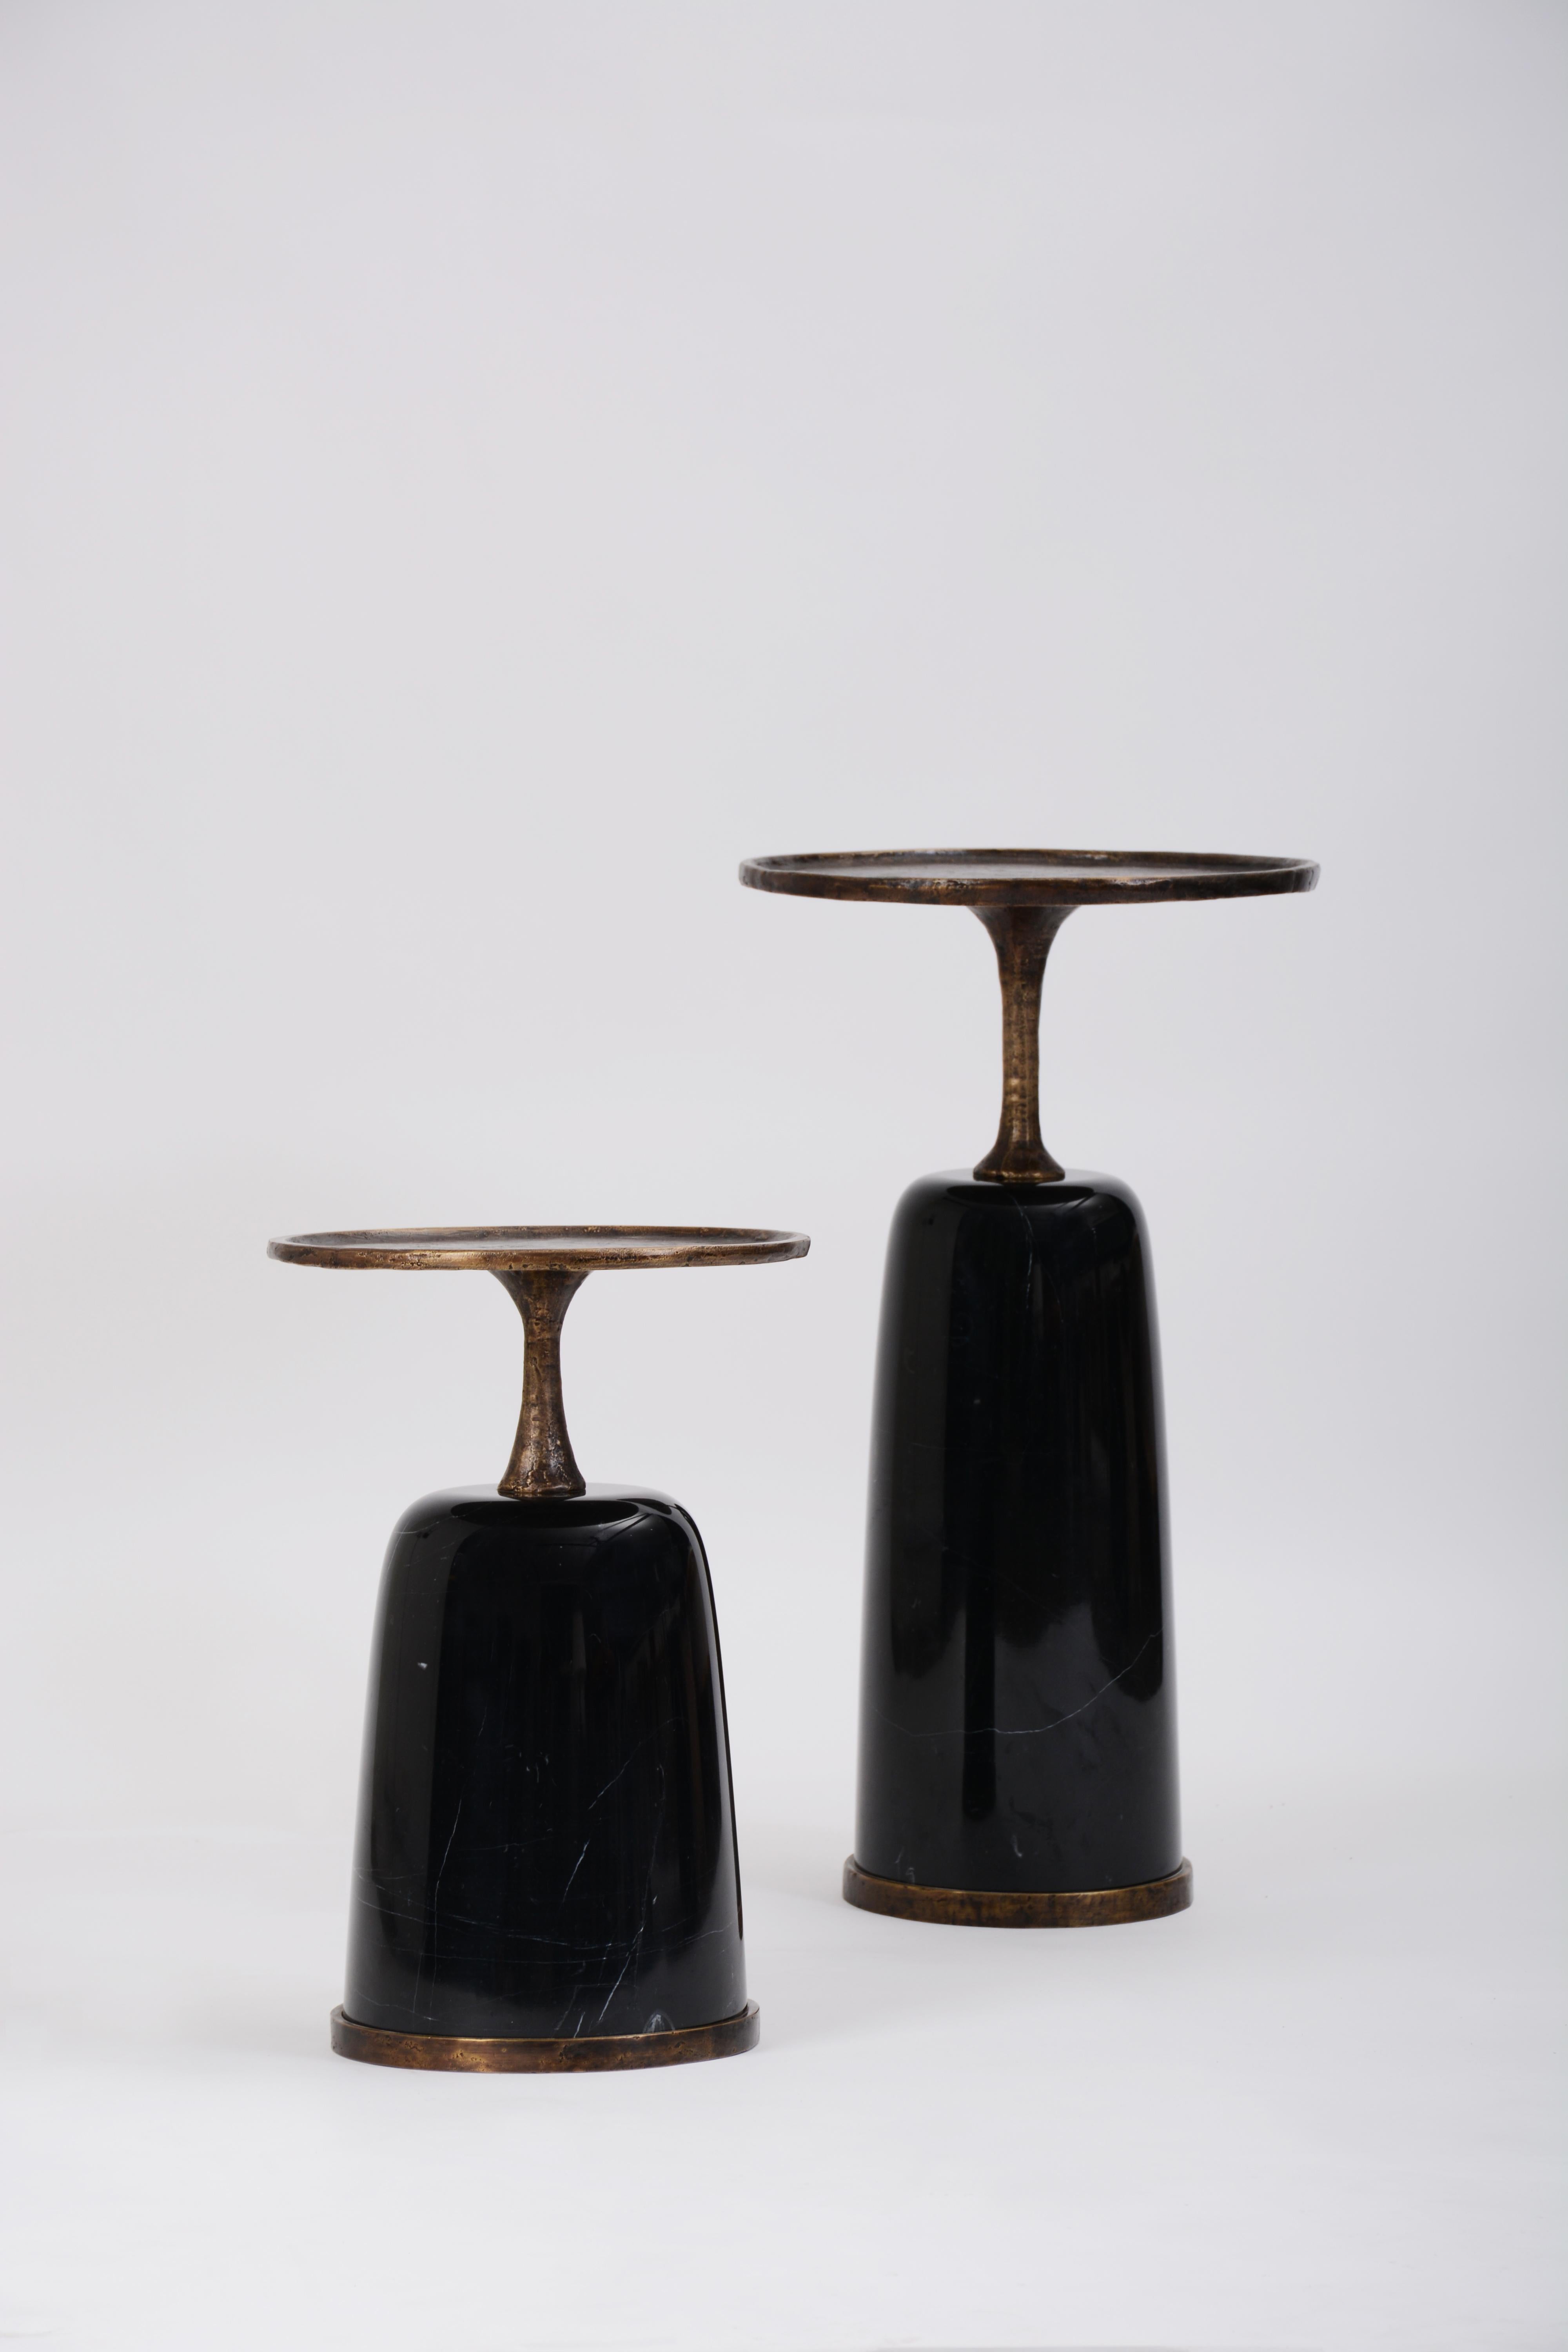 Low Altai Side Table in stock in California. Available in two sizes, tall and low, priced individually.

Sculptural quality lost-wax cast bronze top affixed to shapely marble base. The finish of the top is a textural antique gold bronze. The base is